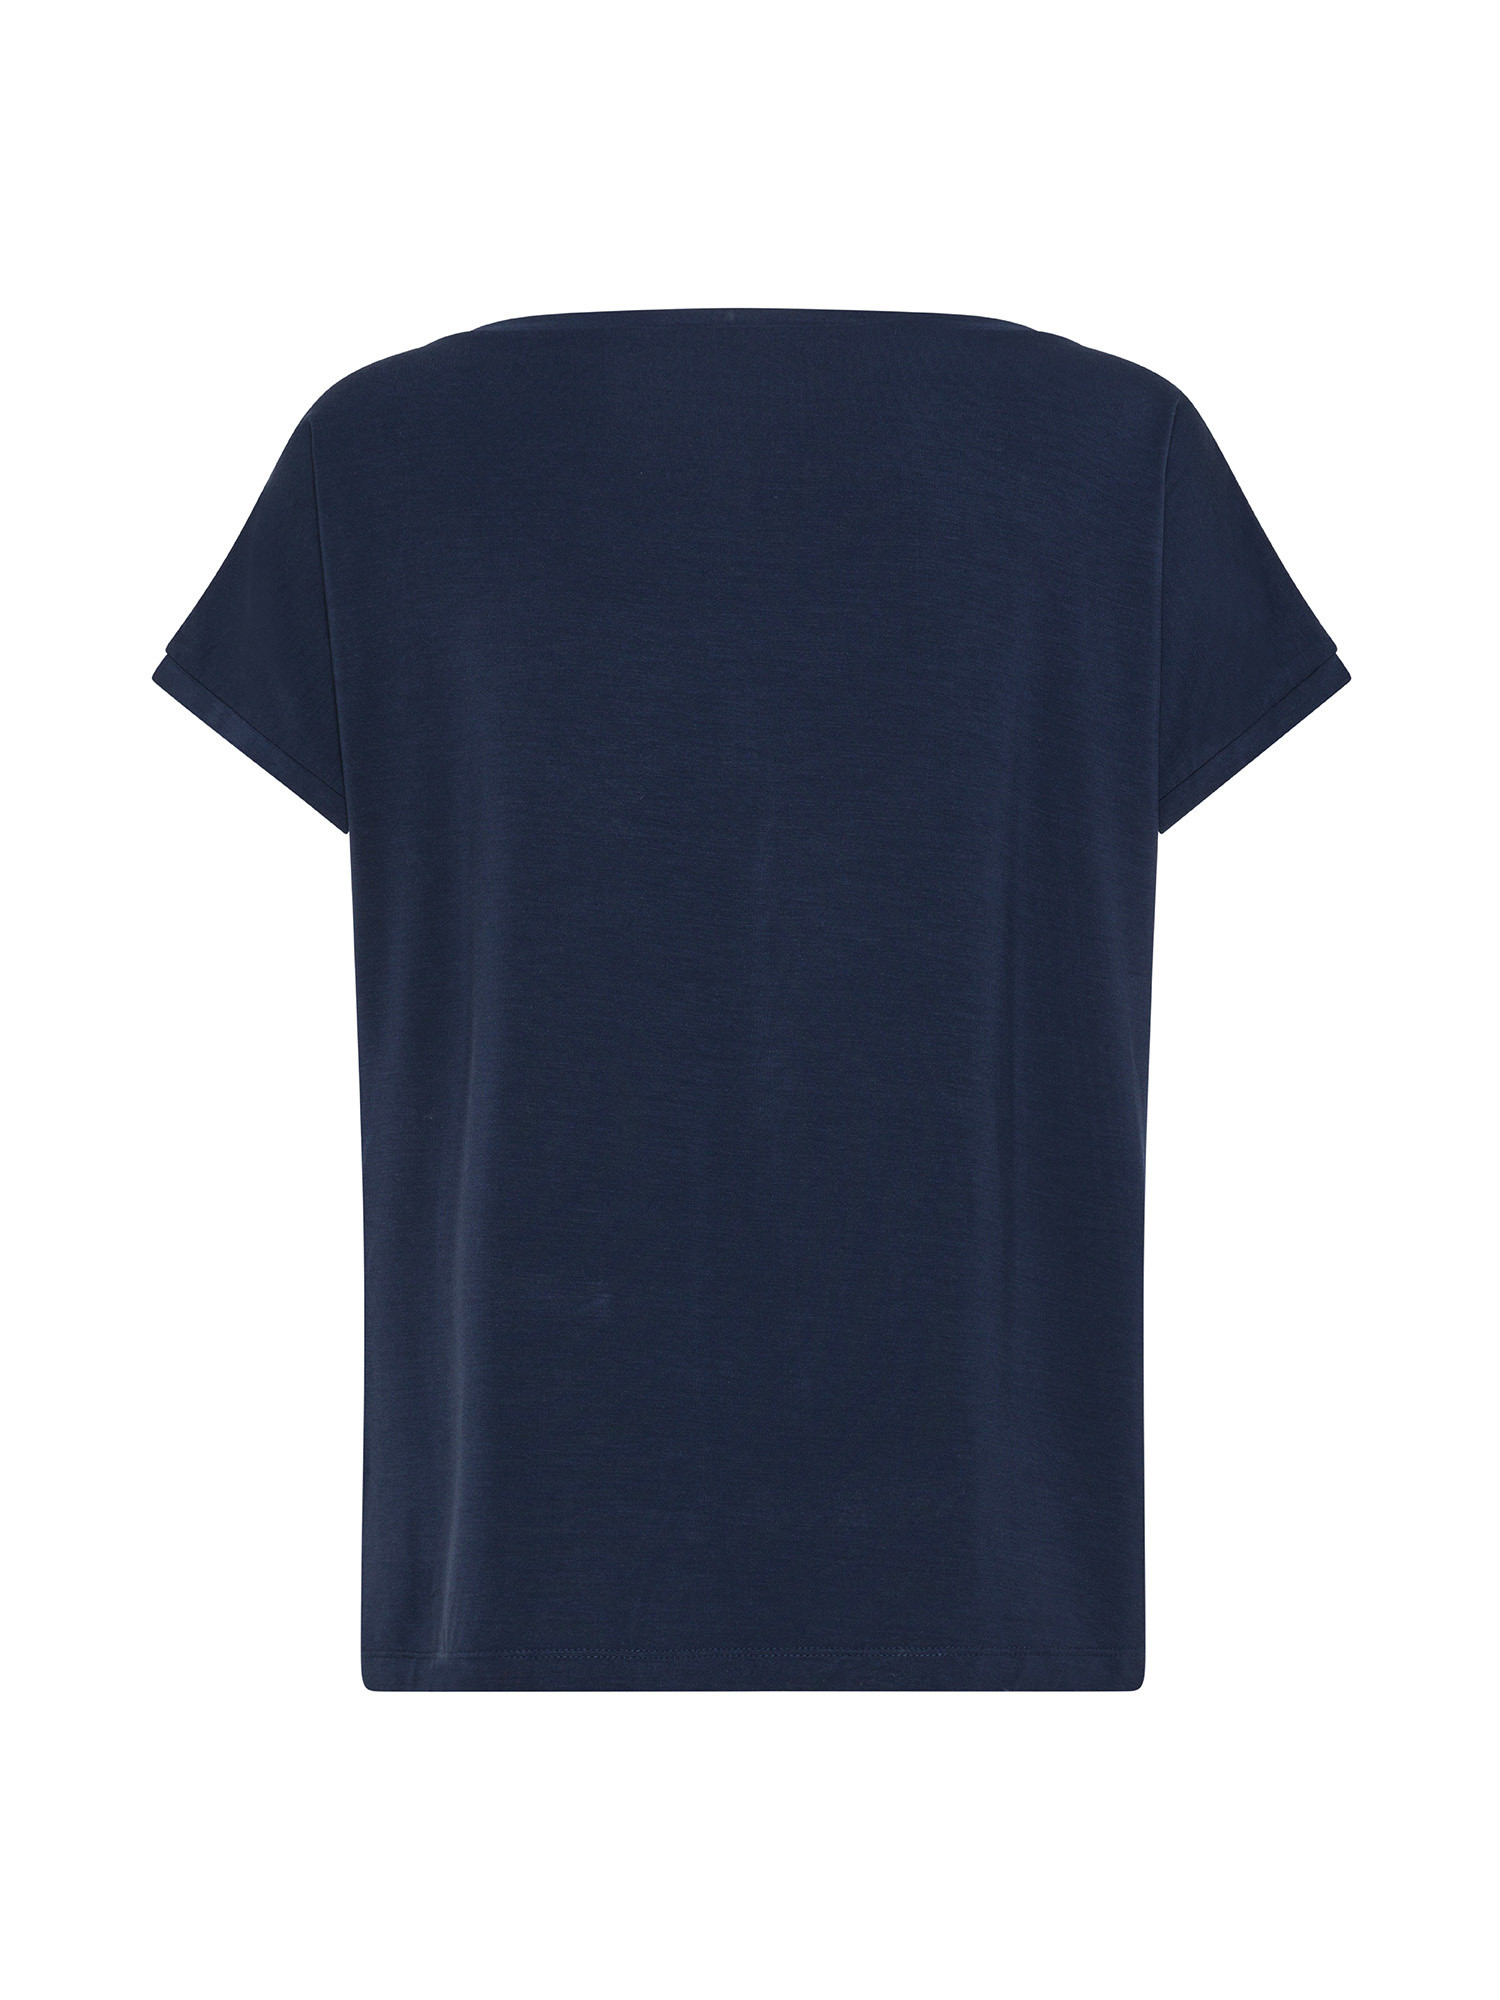 T-shirt in viscosa di bamboo, Blue Navy, large image number 1